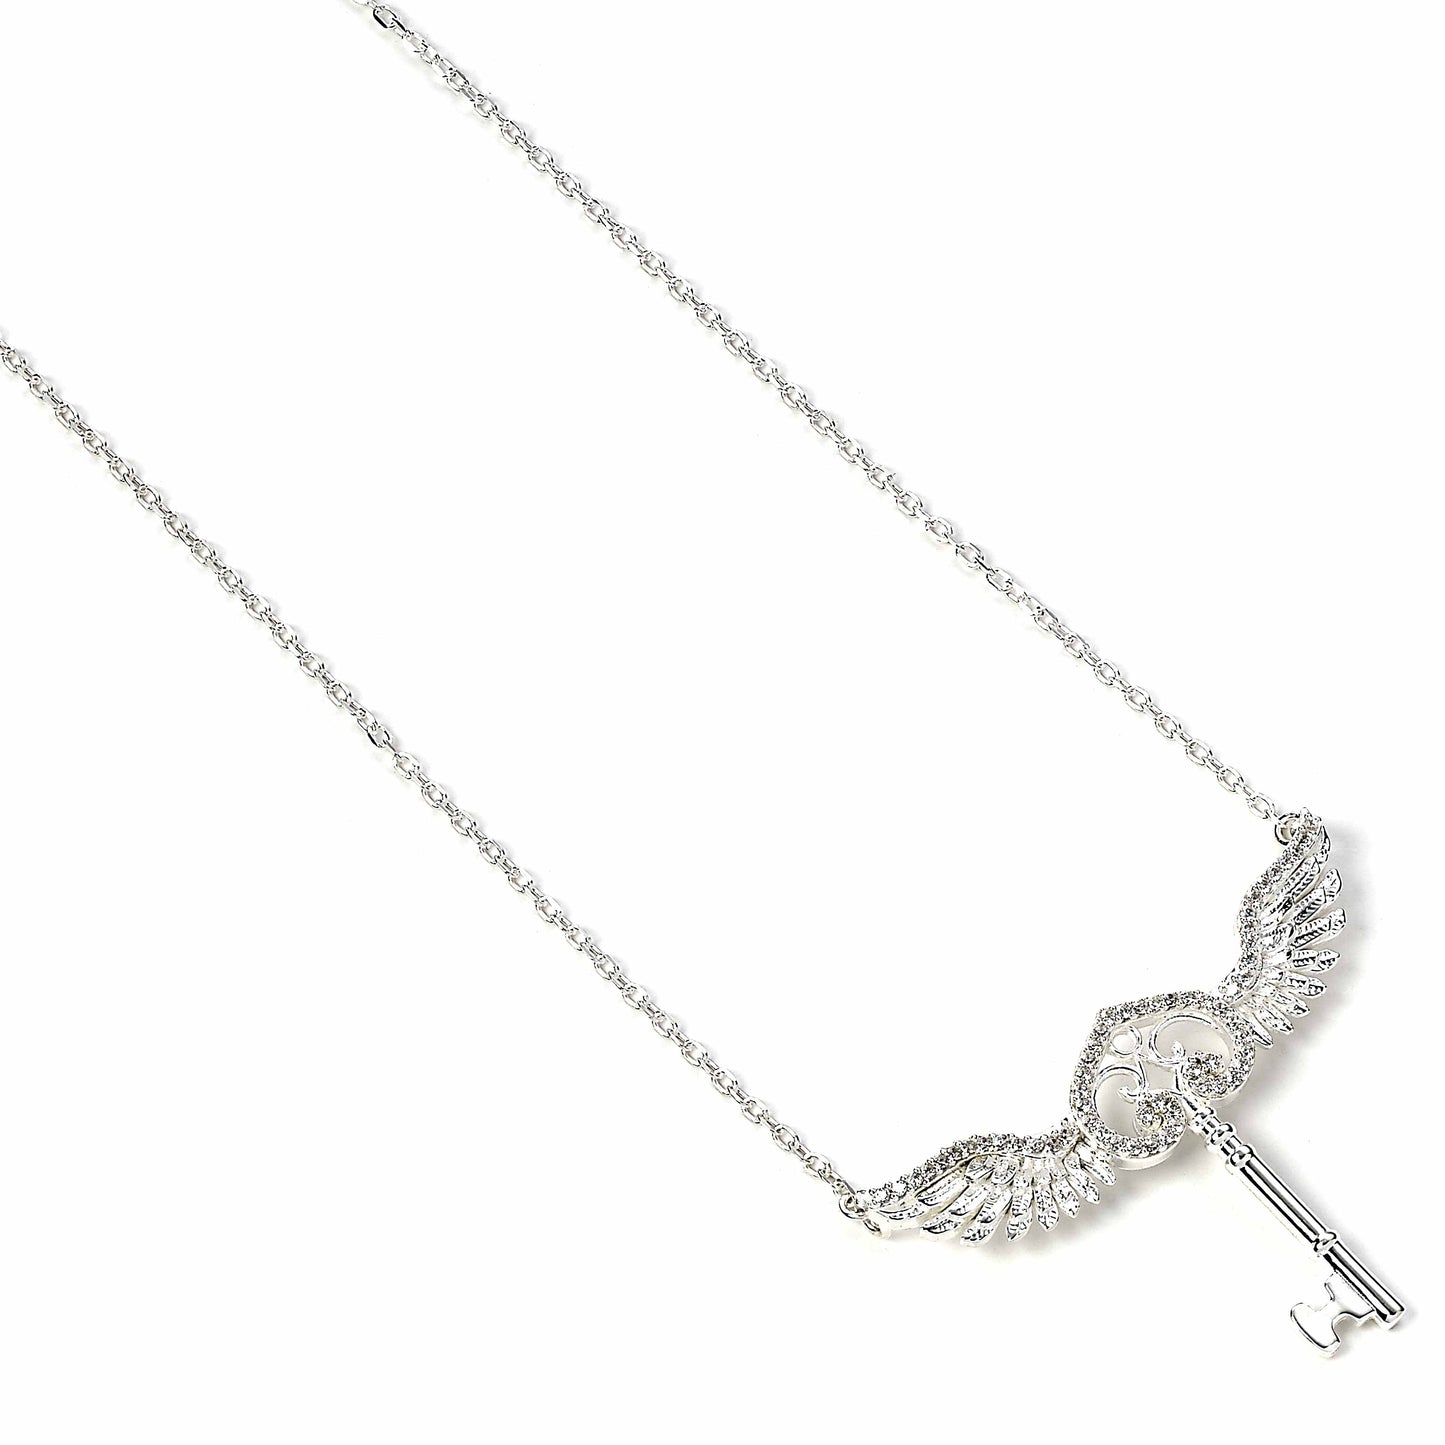 Harry Potter Flying Key Necklace Embellished with Crystals - Sterling Silver